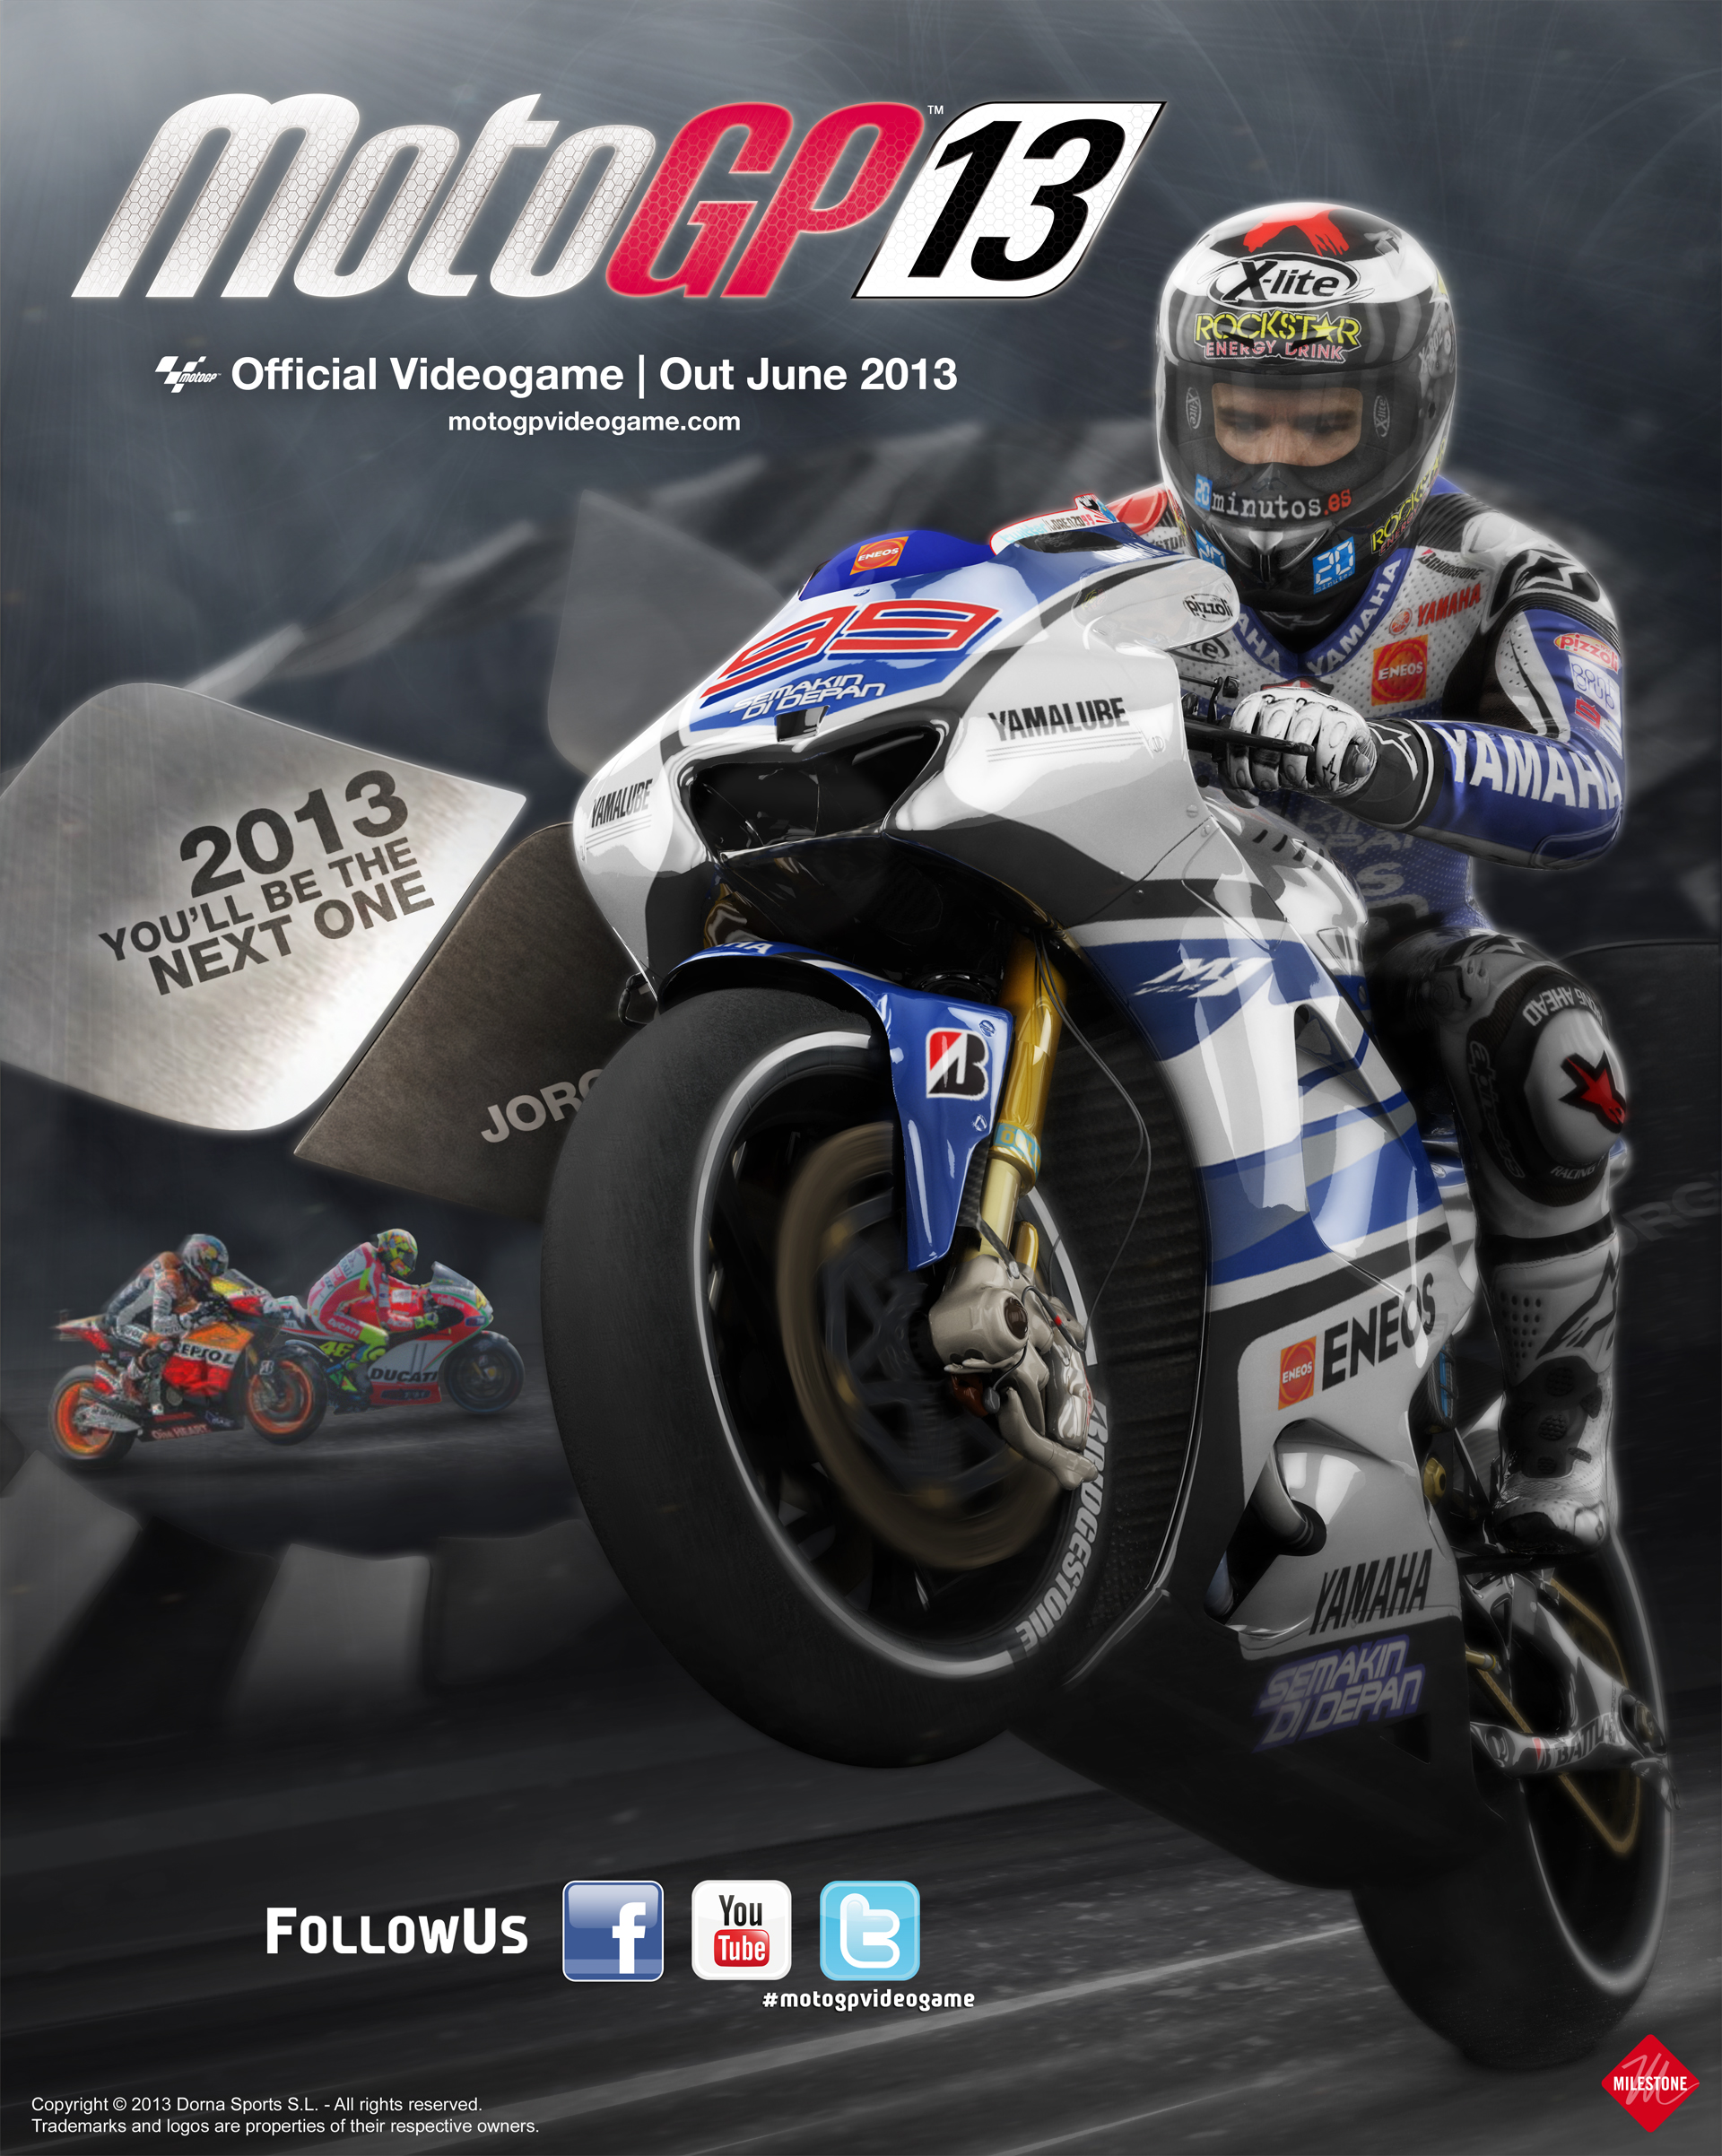 MotoGP ART - You'll be the next one